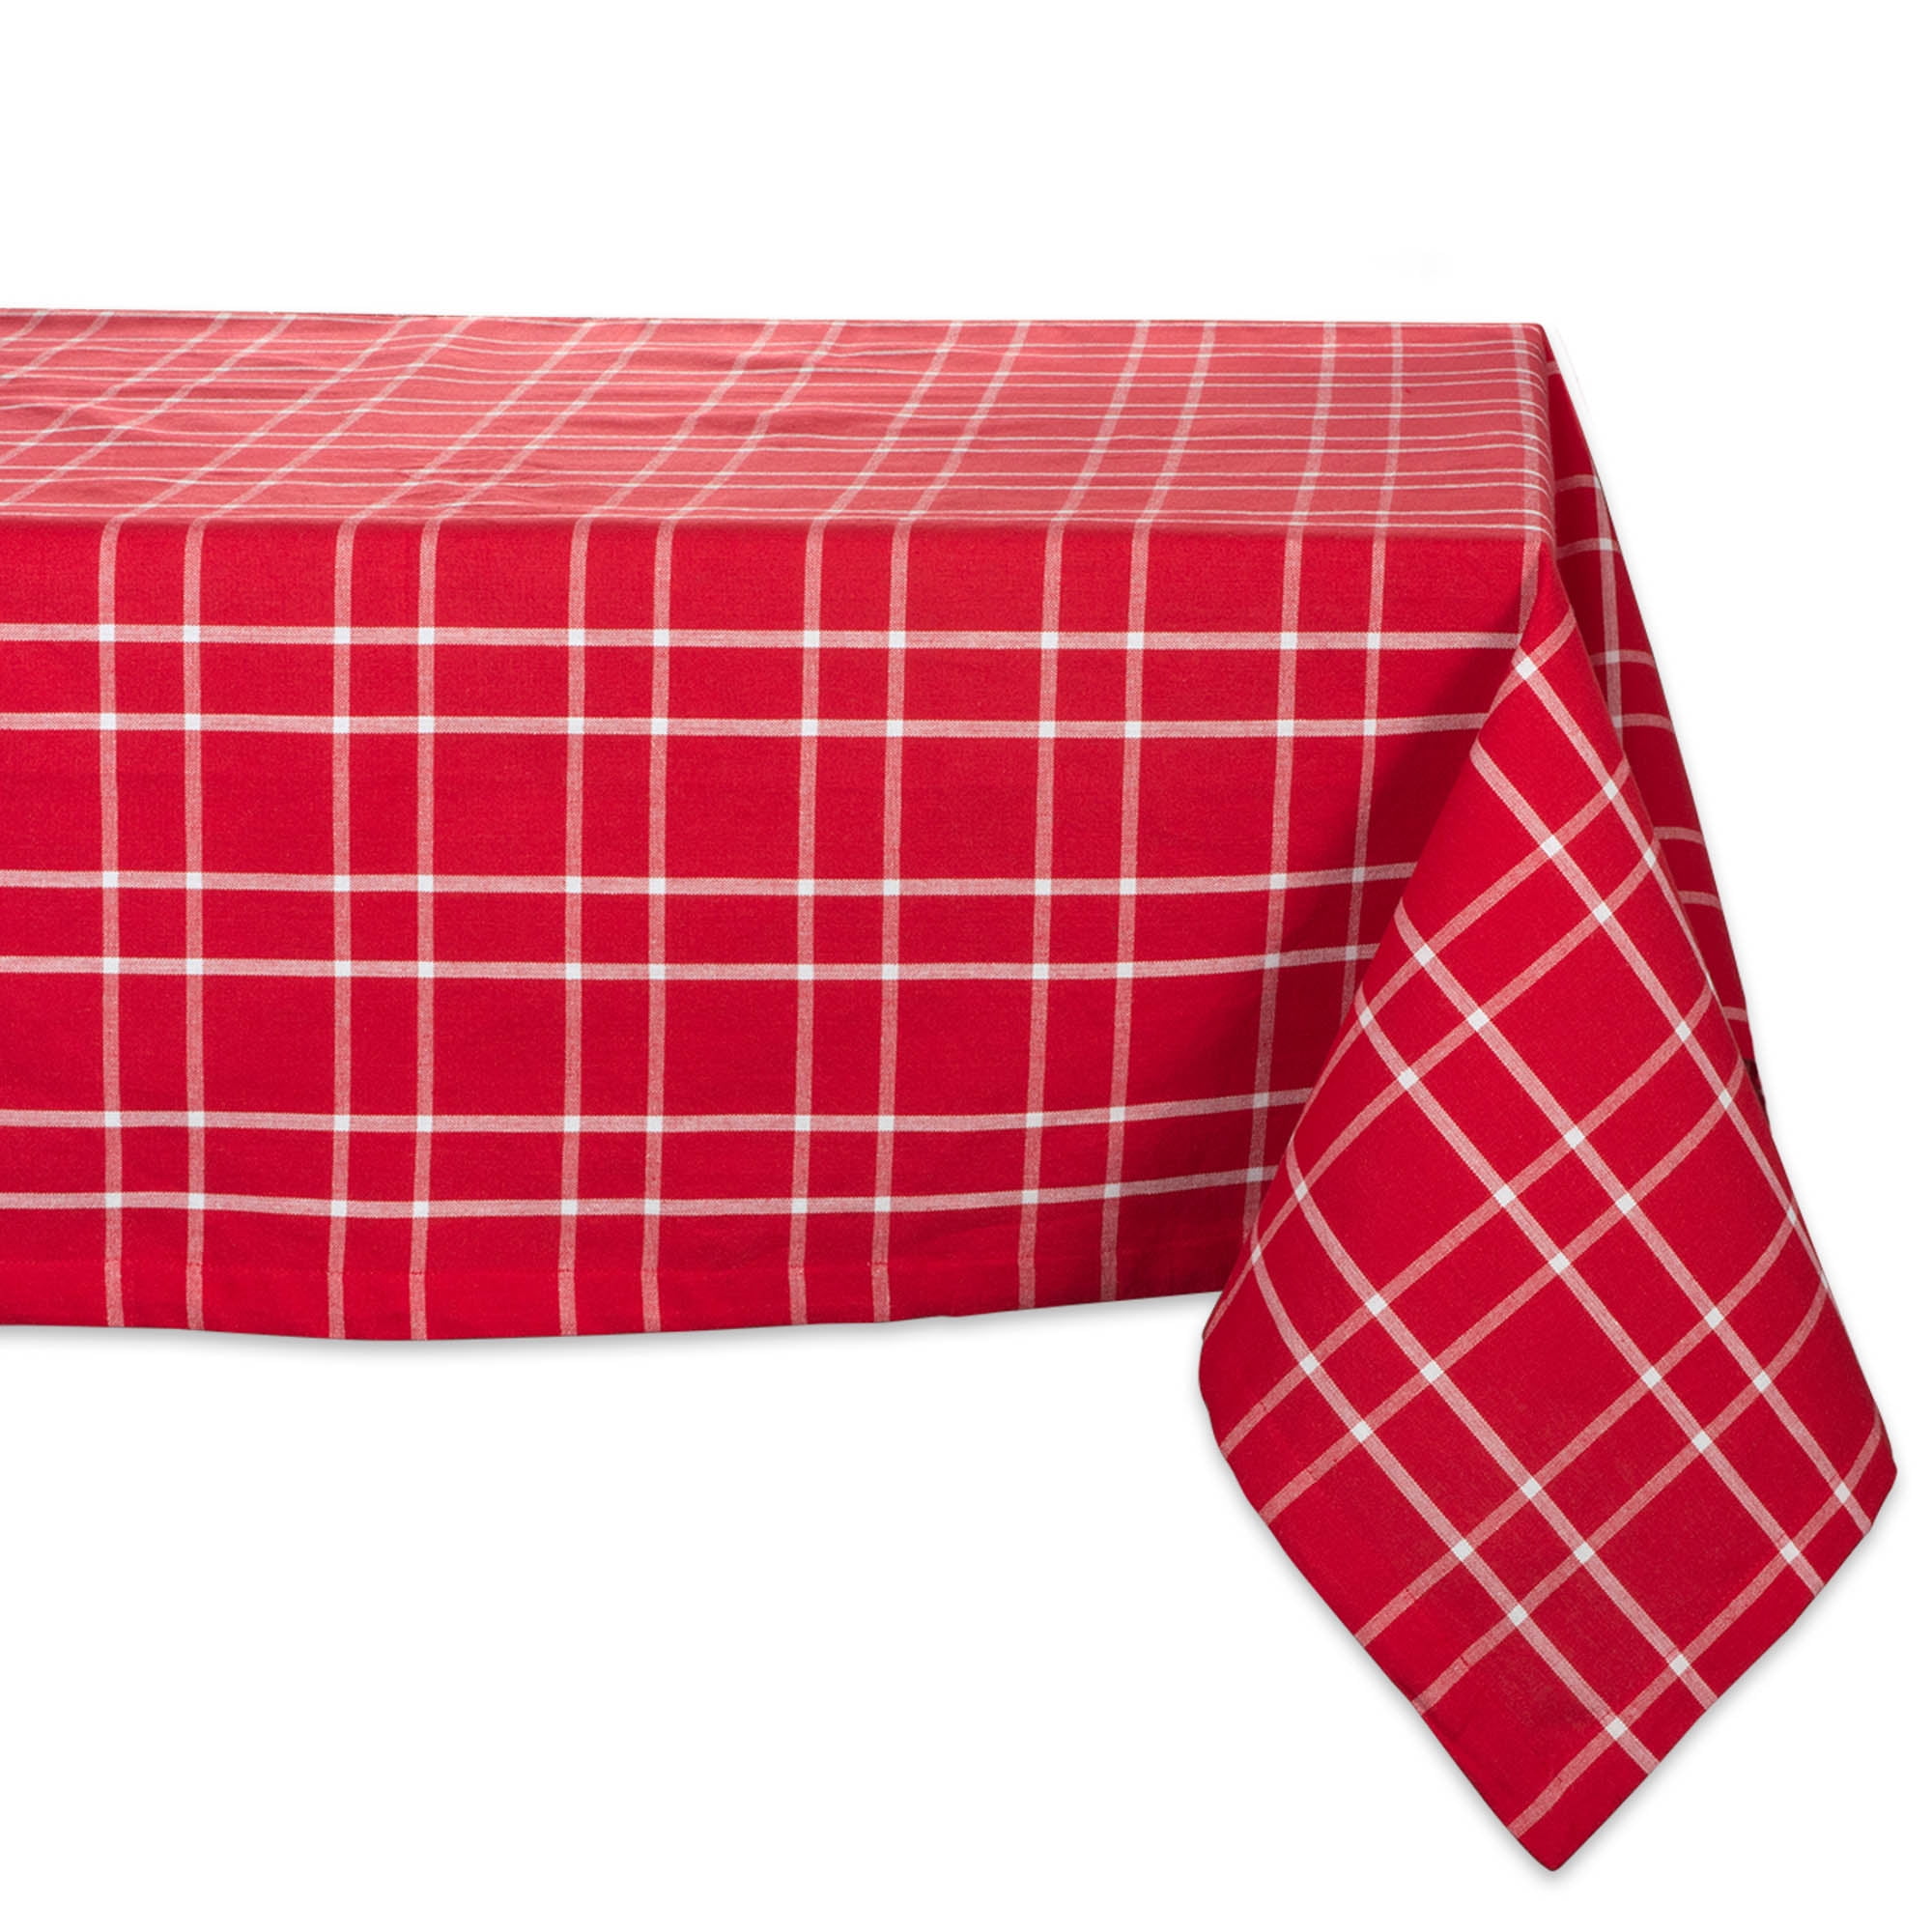 Christmas Buffalo Plaid 52x52inch Tablecloths for Square/Round Tables,Xmas Holly Berry,Red Parties Table Cloth Cotton Linens Covers for Kitchen Dinning Wedding,Wrinkle Resistant,Farm Table Decor